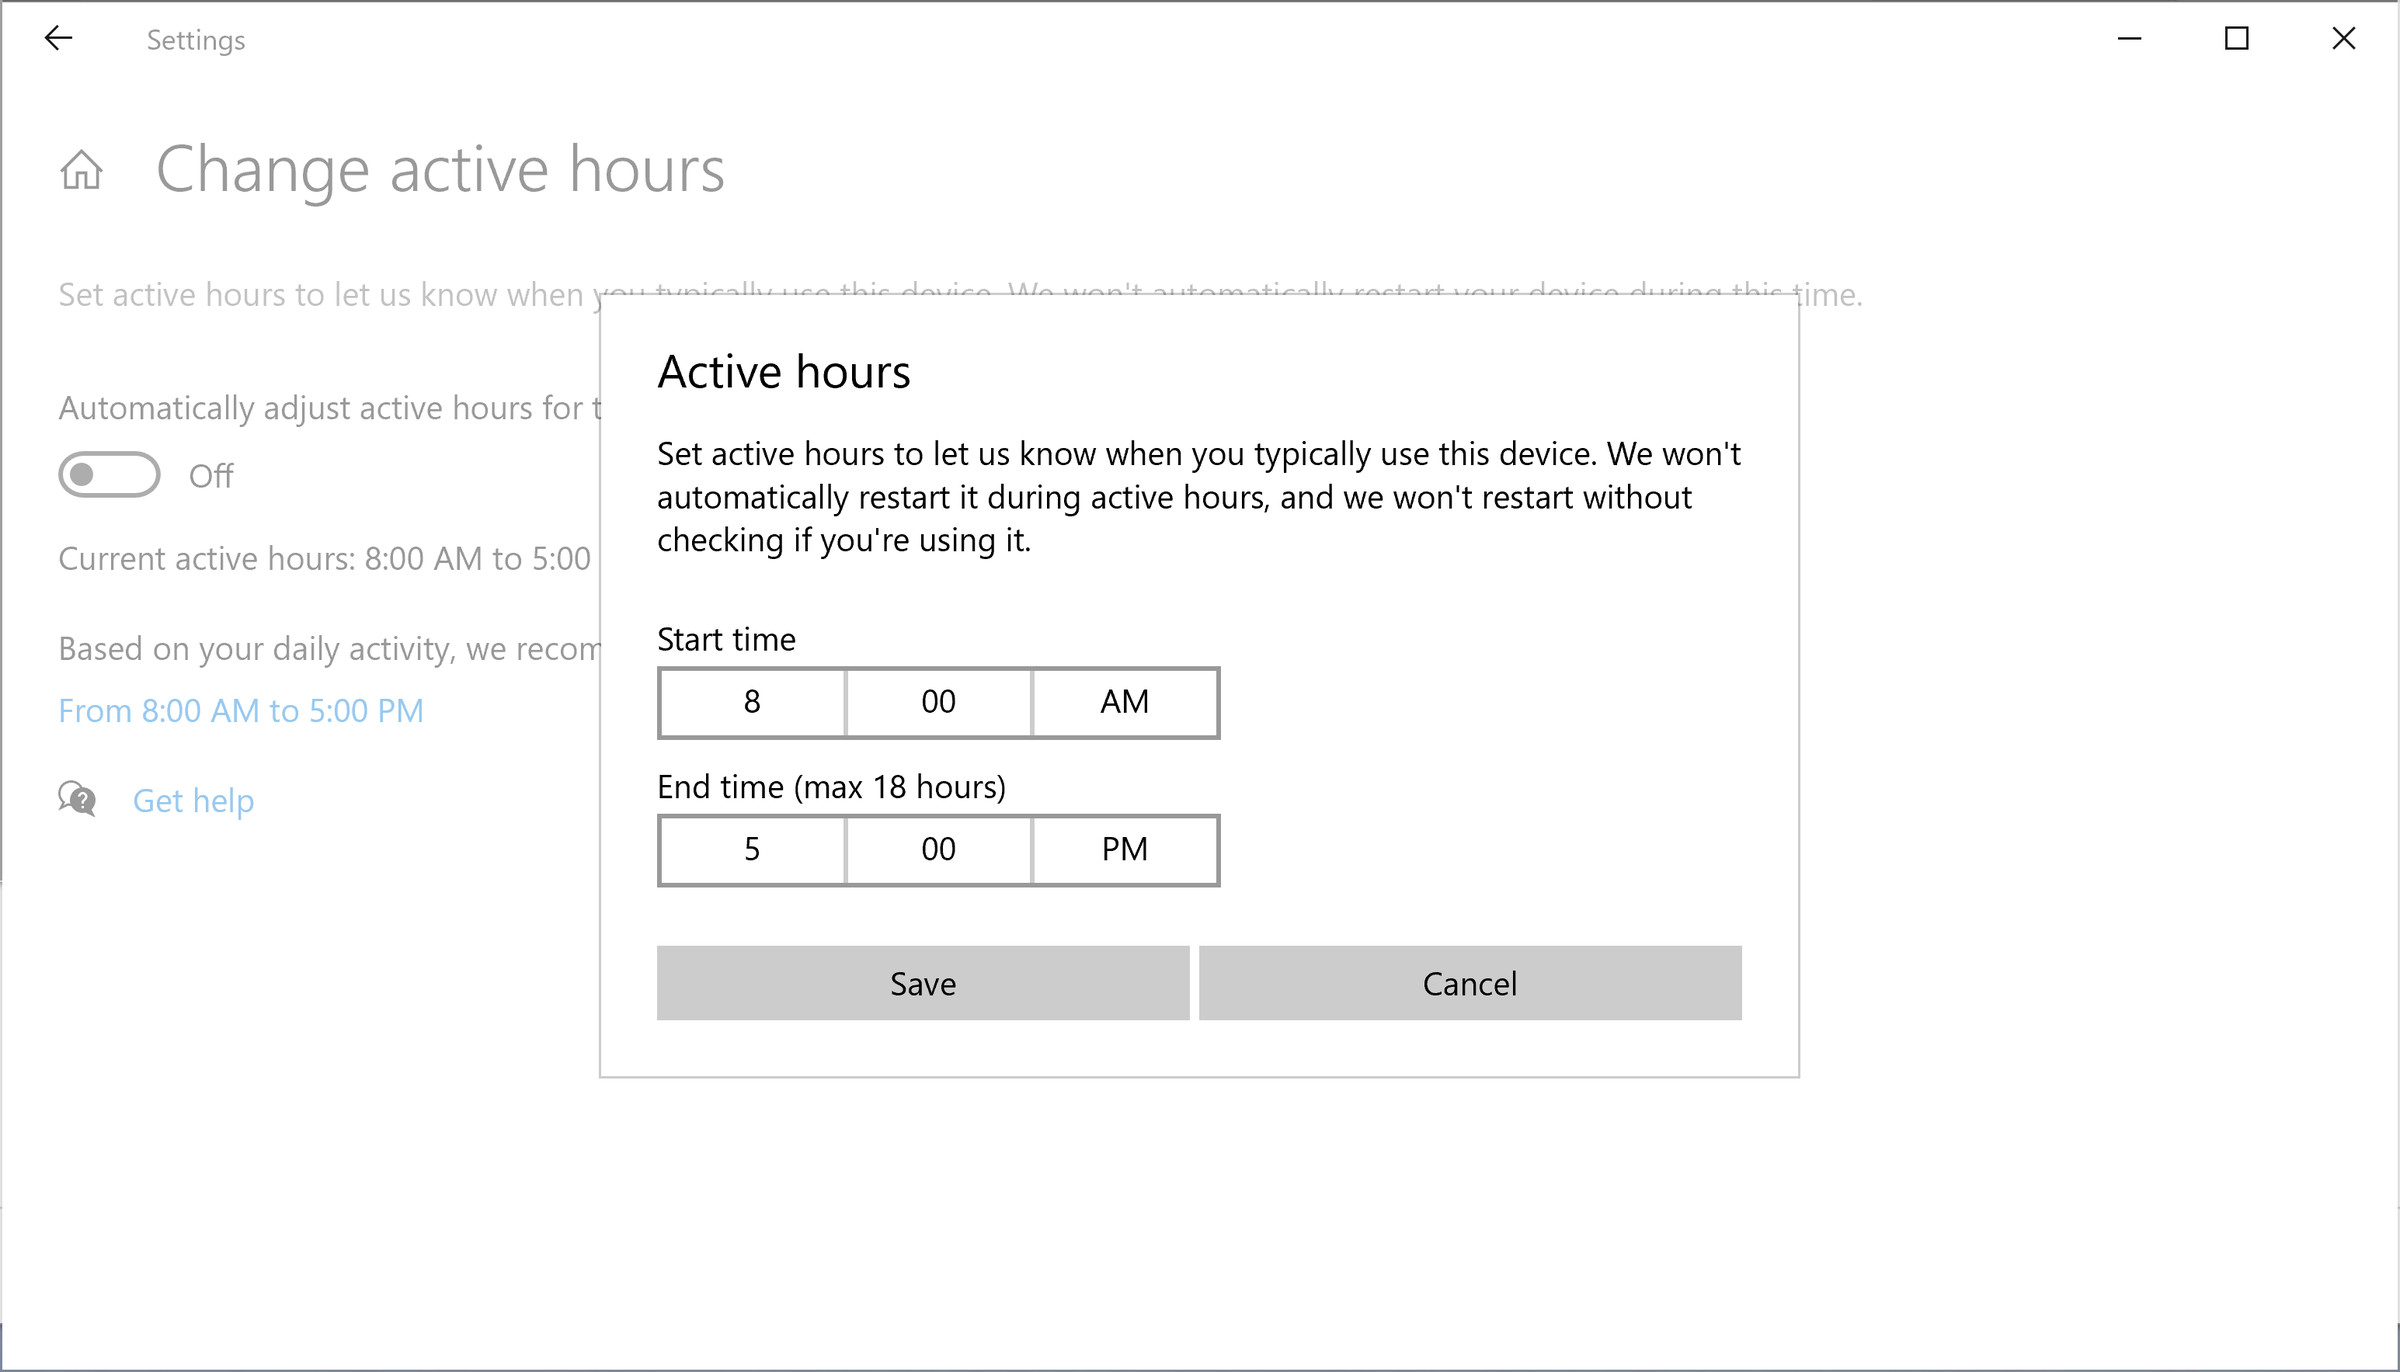 Set your own active hours by adjusting the time in this window.